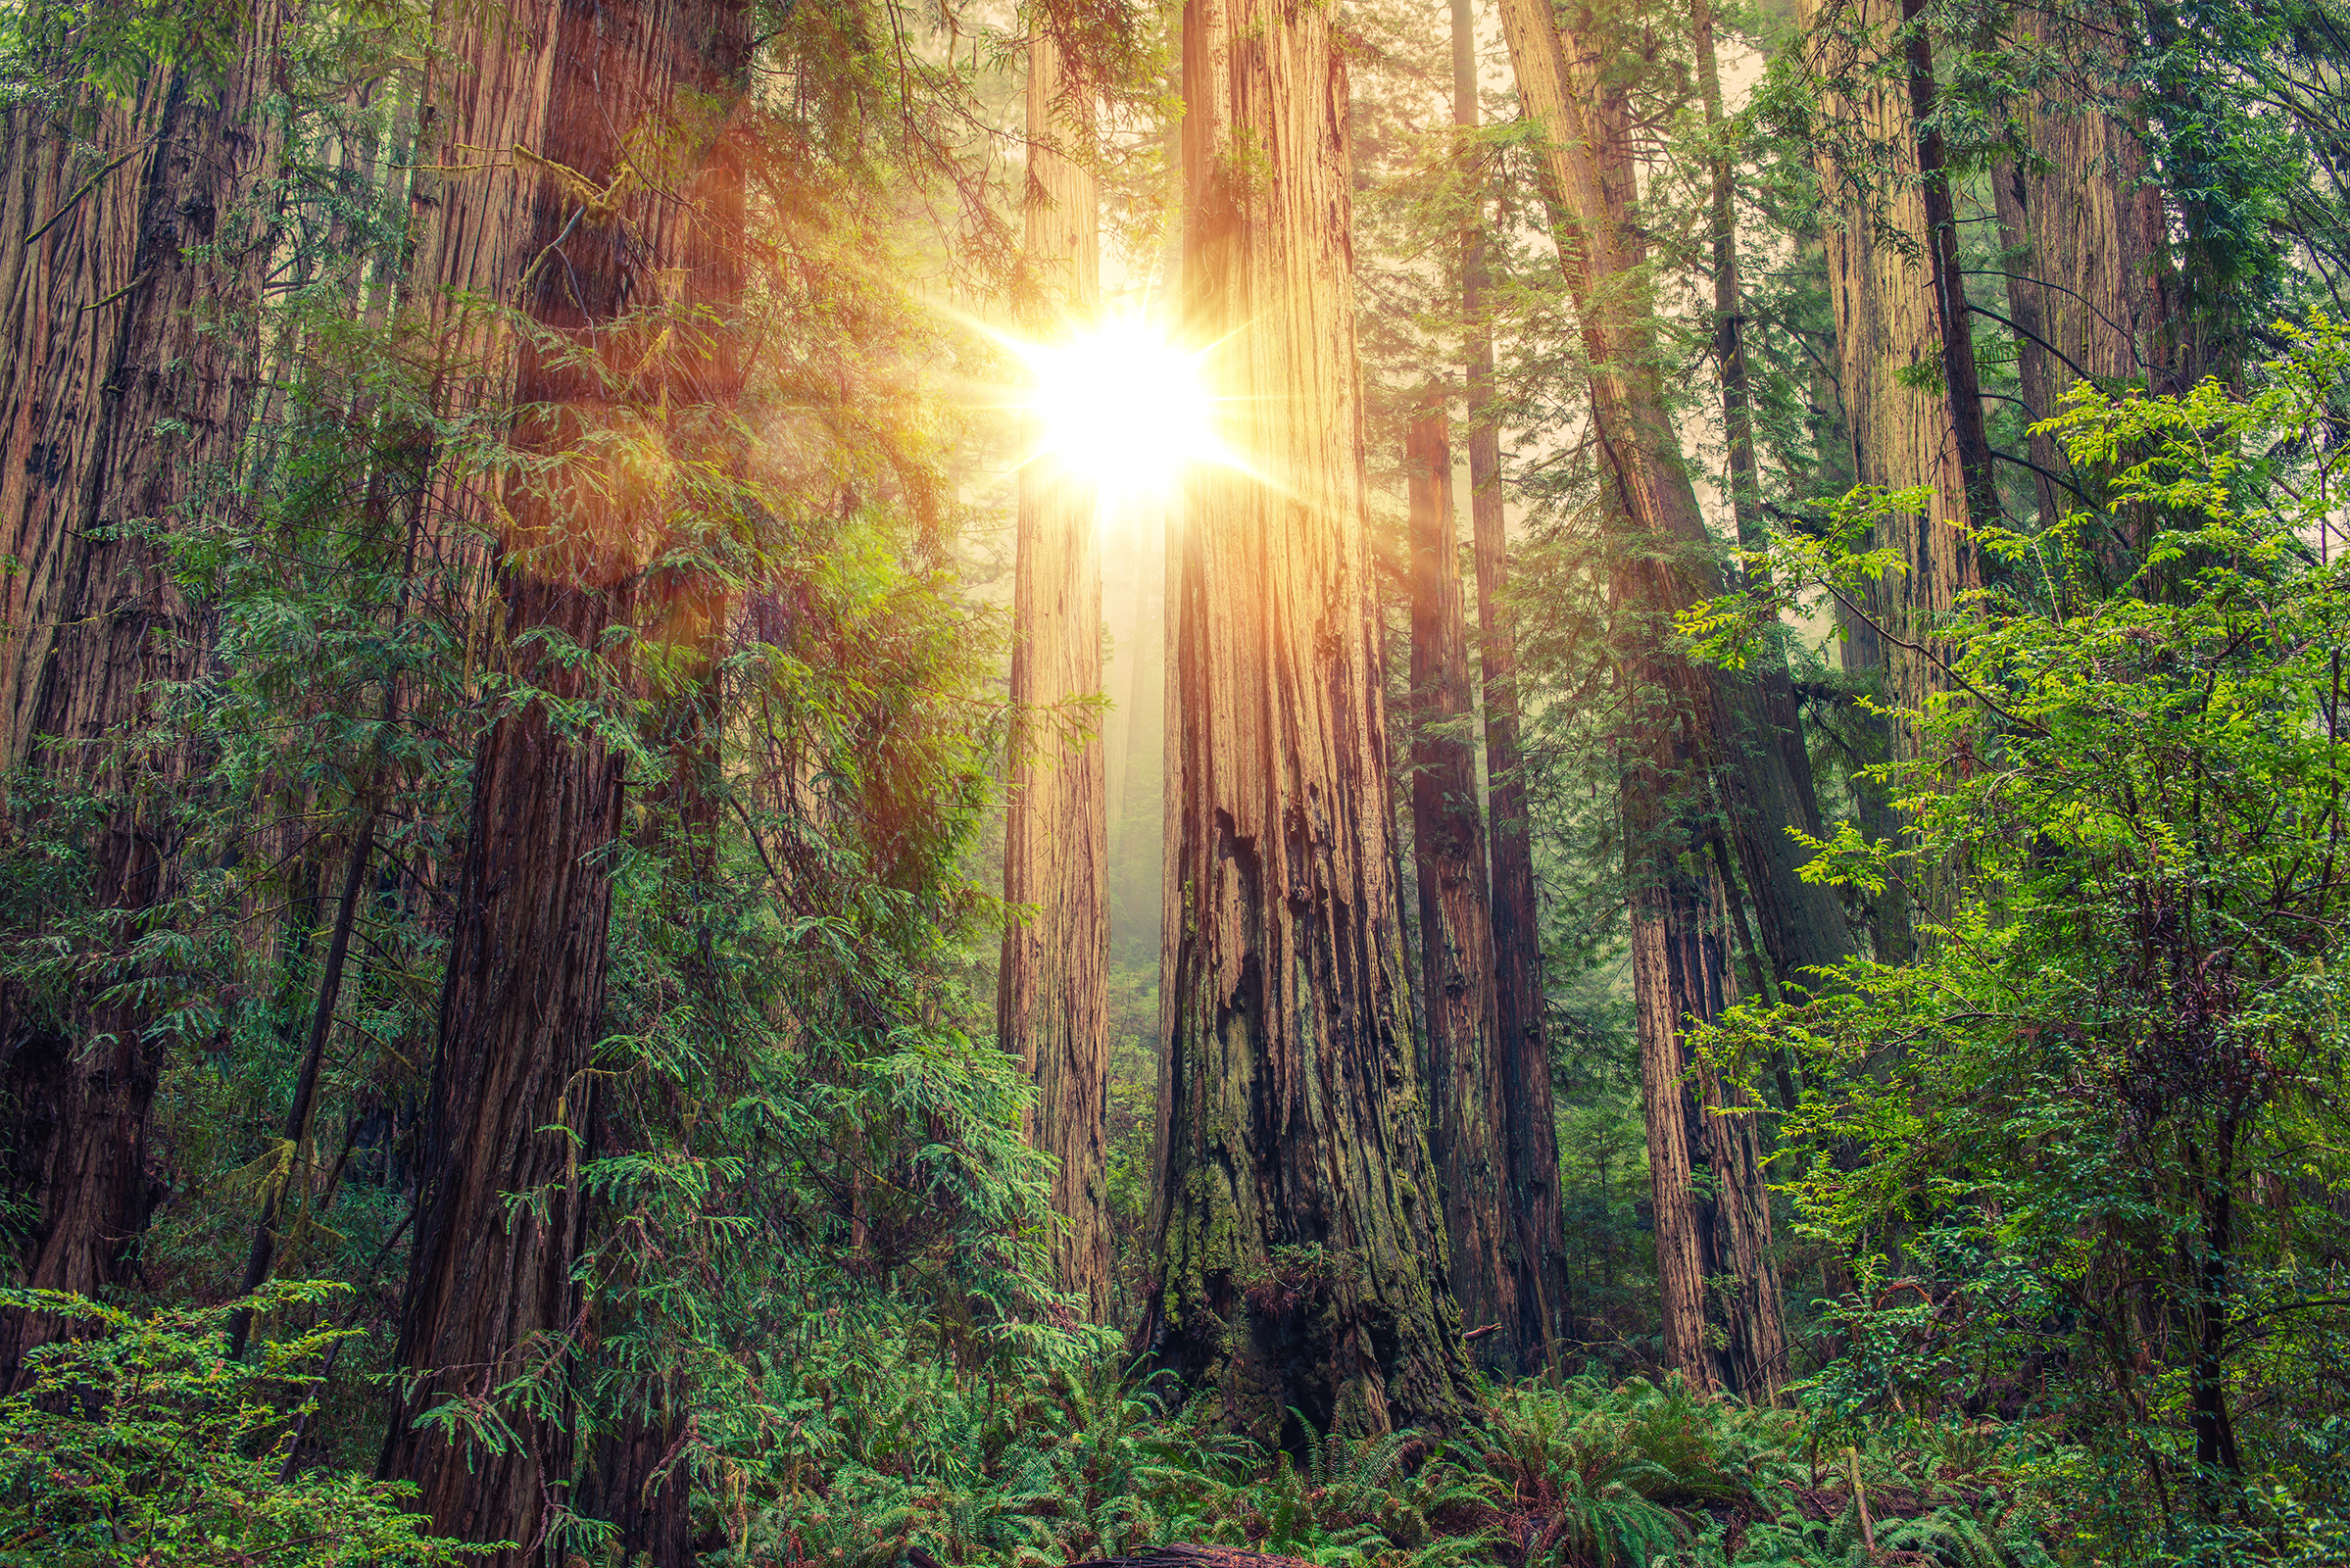 A view of the sun shining through giant redwoods at Redwoods National Park.